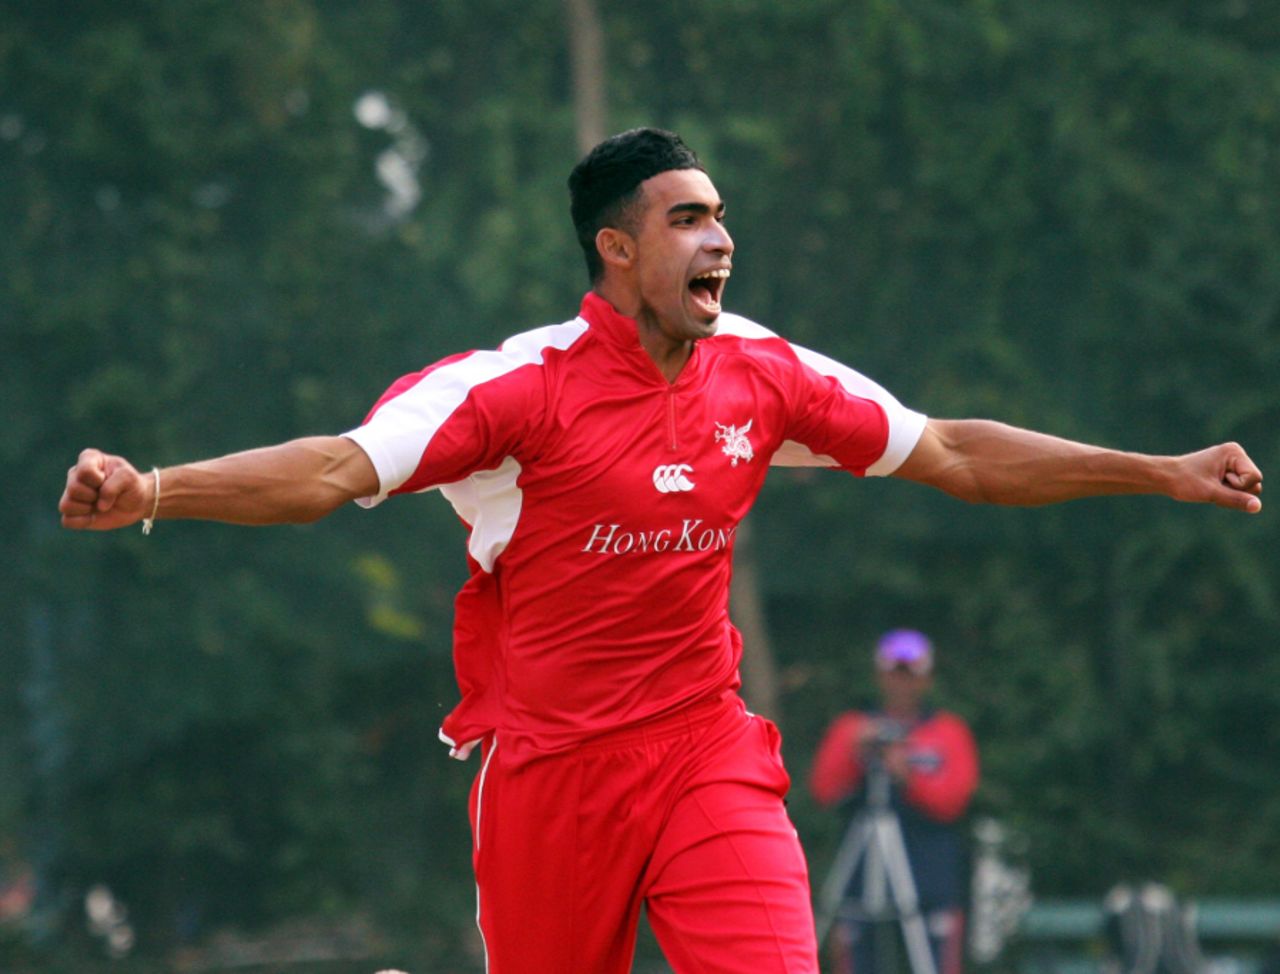 Irfan Ahmed was on a hat-trick when he had Rajesh Kumar caught behind, Italy v Papua New Guinea, WCL Division 3, Wong Nai, January 23, 2011